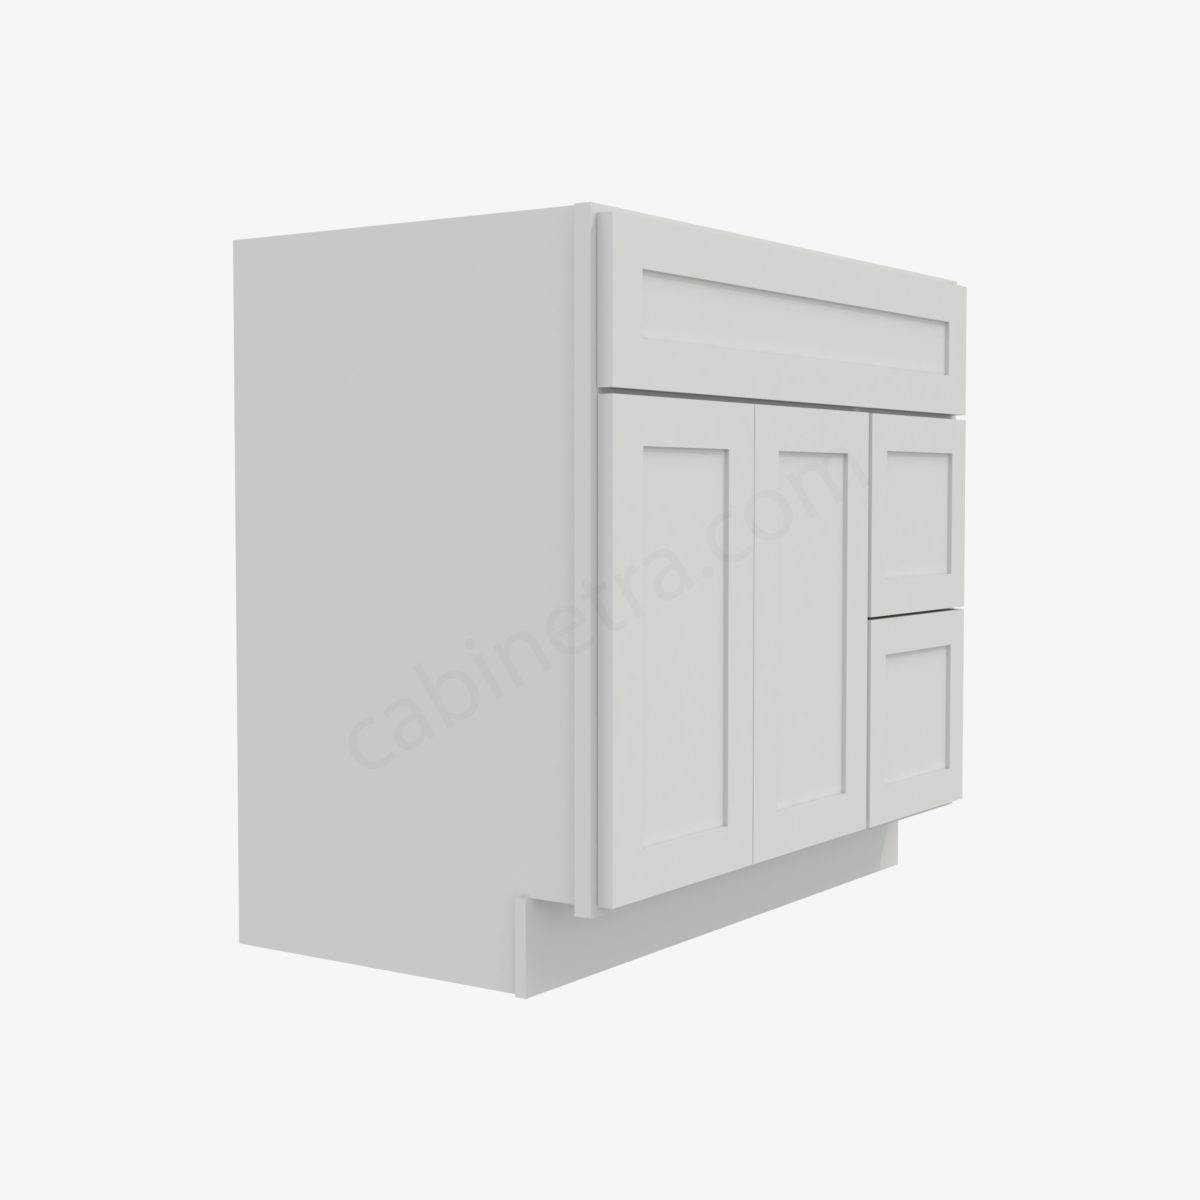 AW S3621BDR 34 4 Forevermark Ice White Shaker Cabinetra scaled